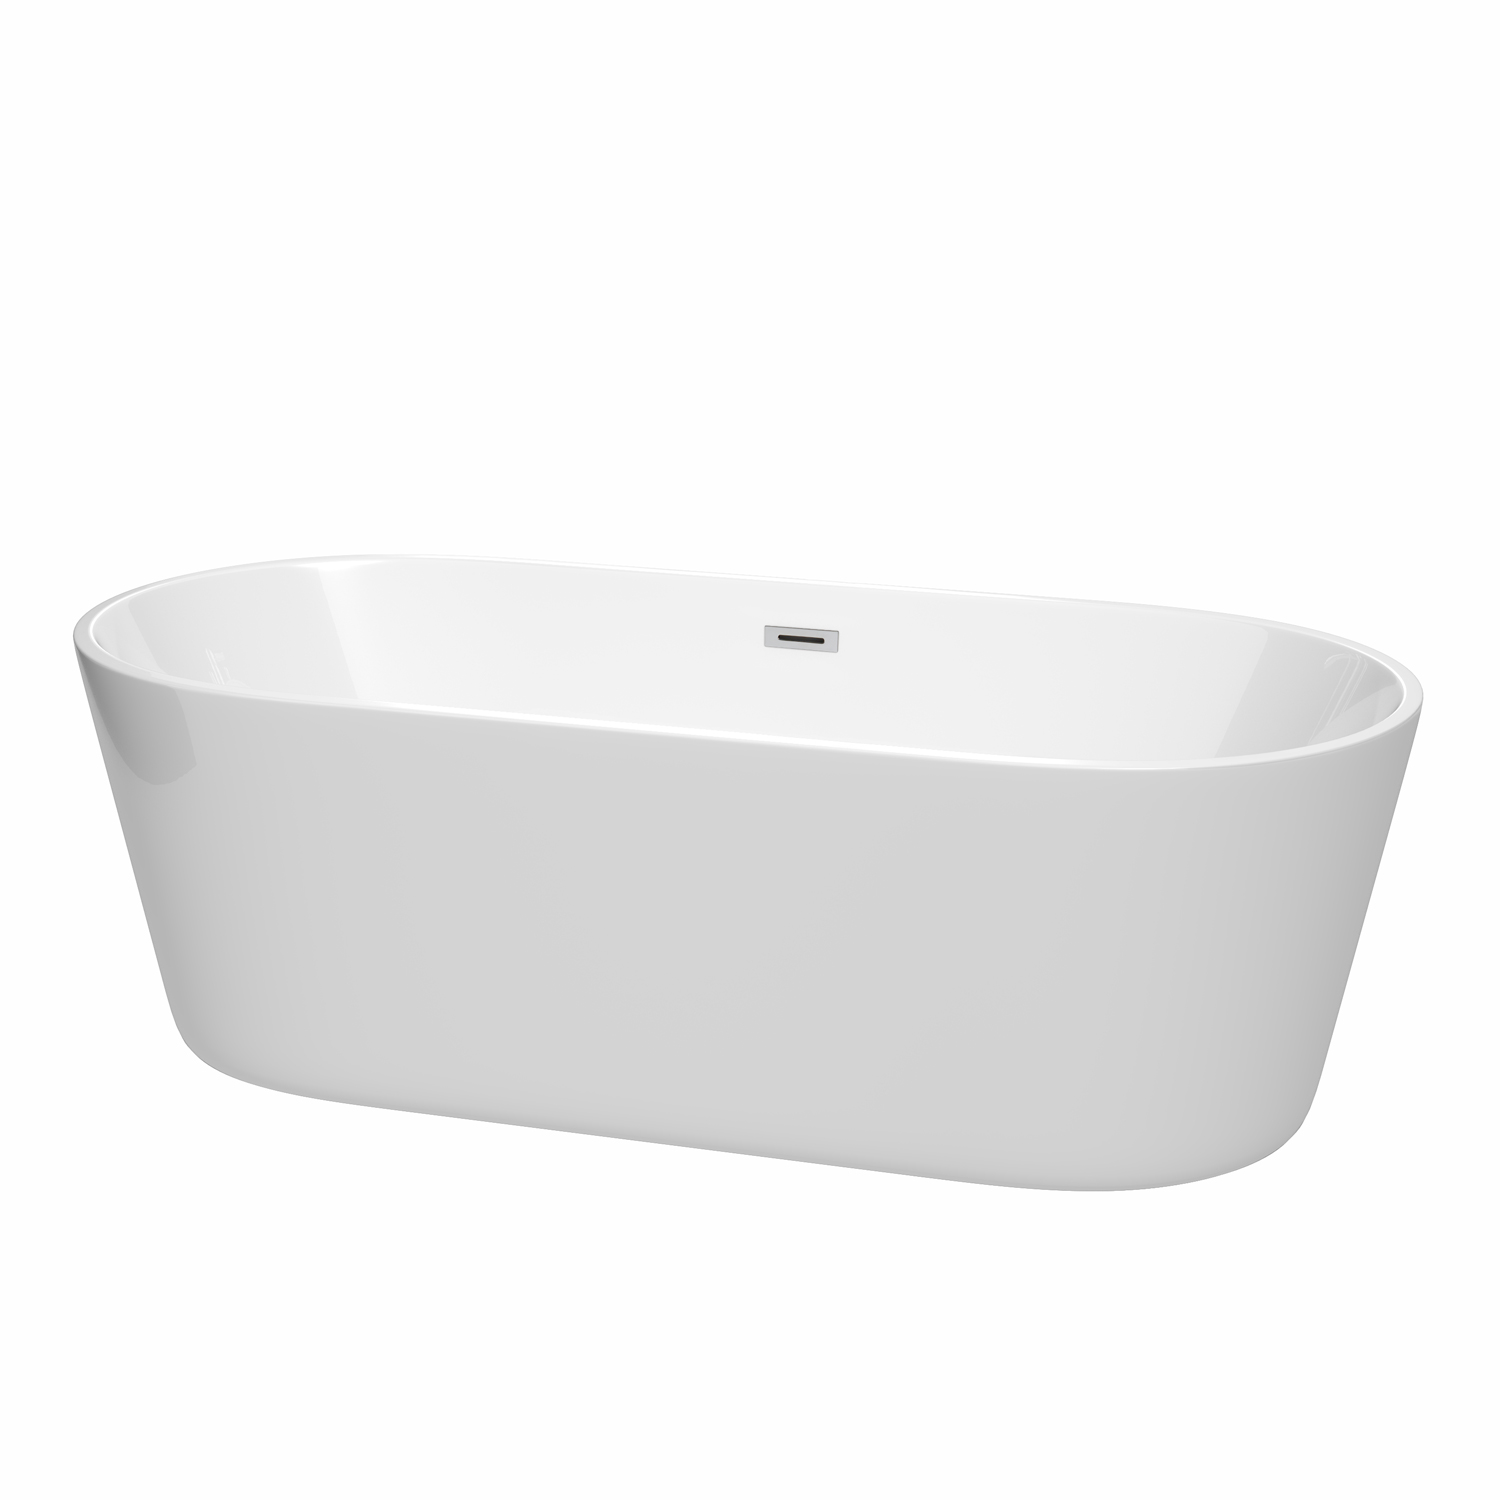 71" Freestanding Bathtub in White with Polished Chrome Drain and Overflow Trim with Hardware and Faucet Options